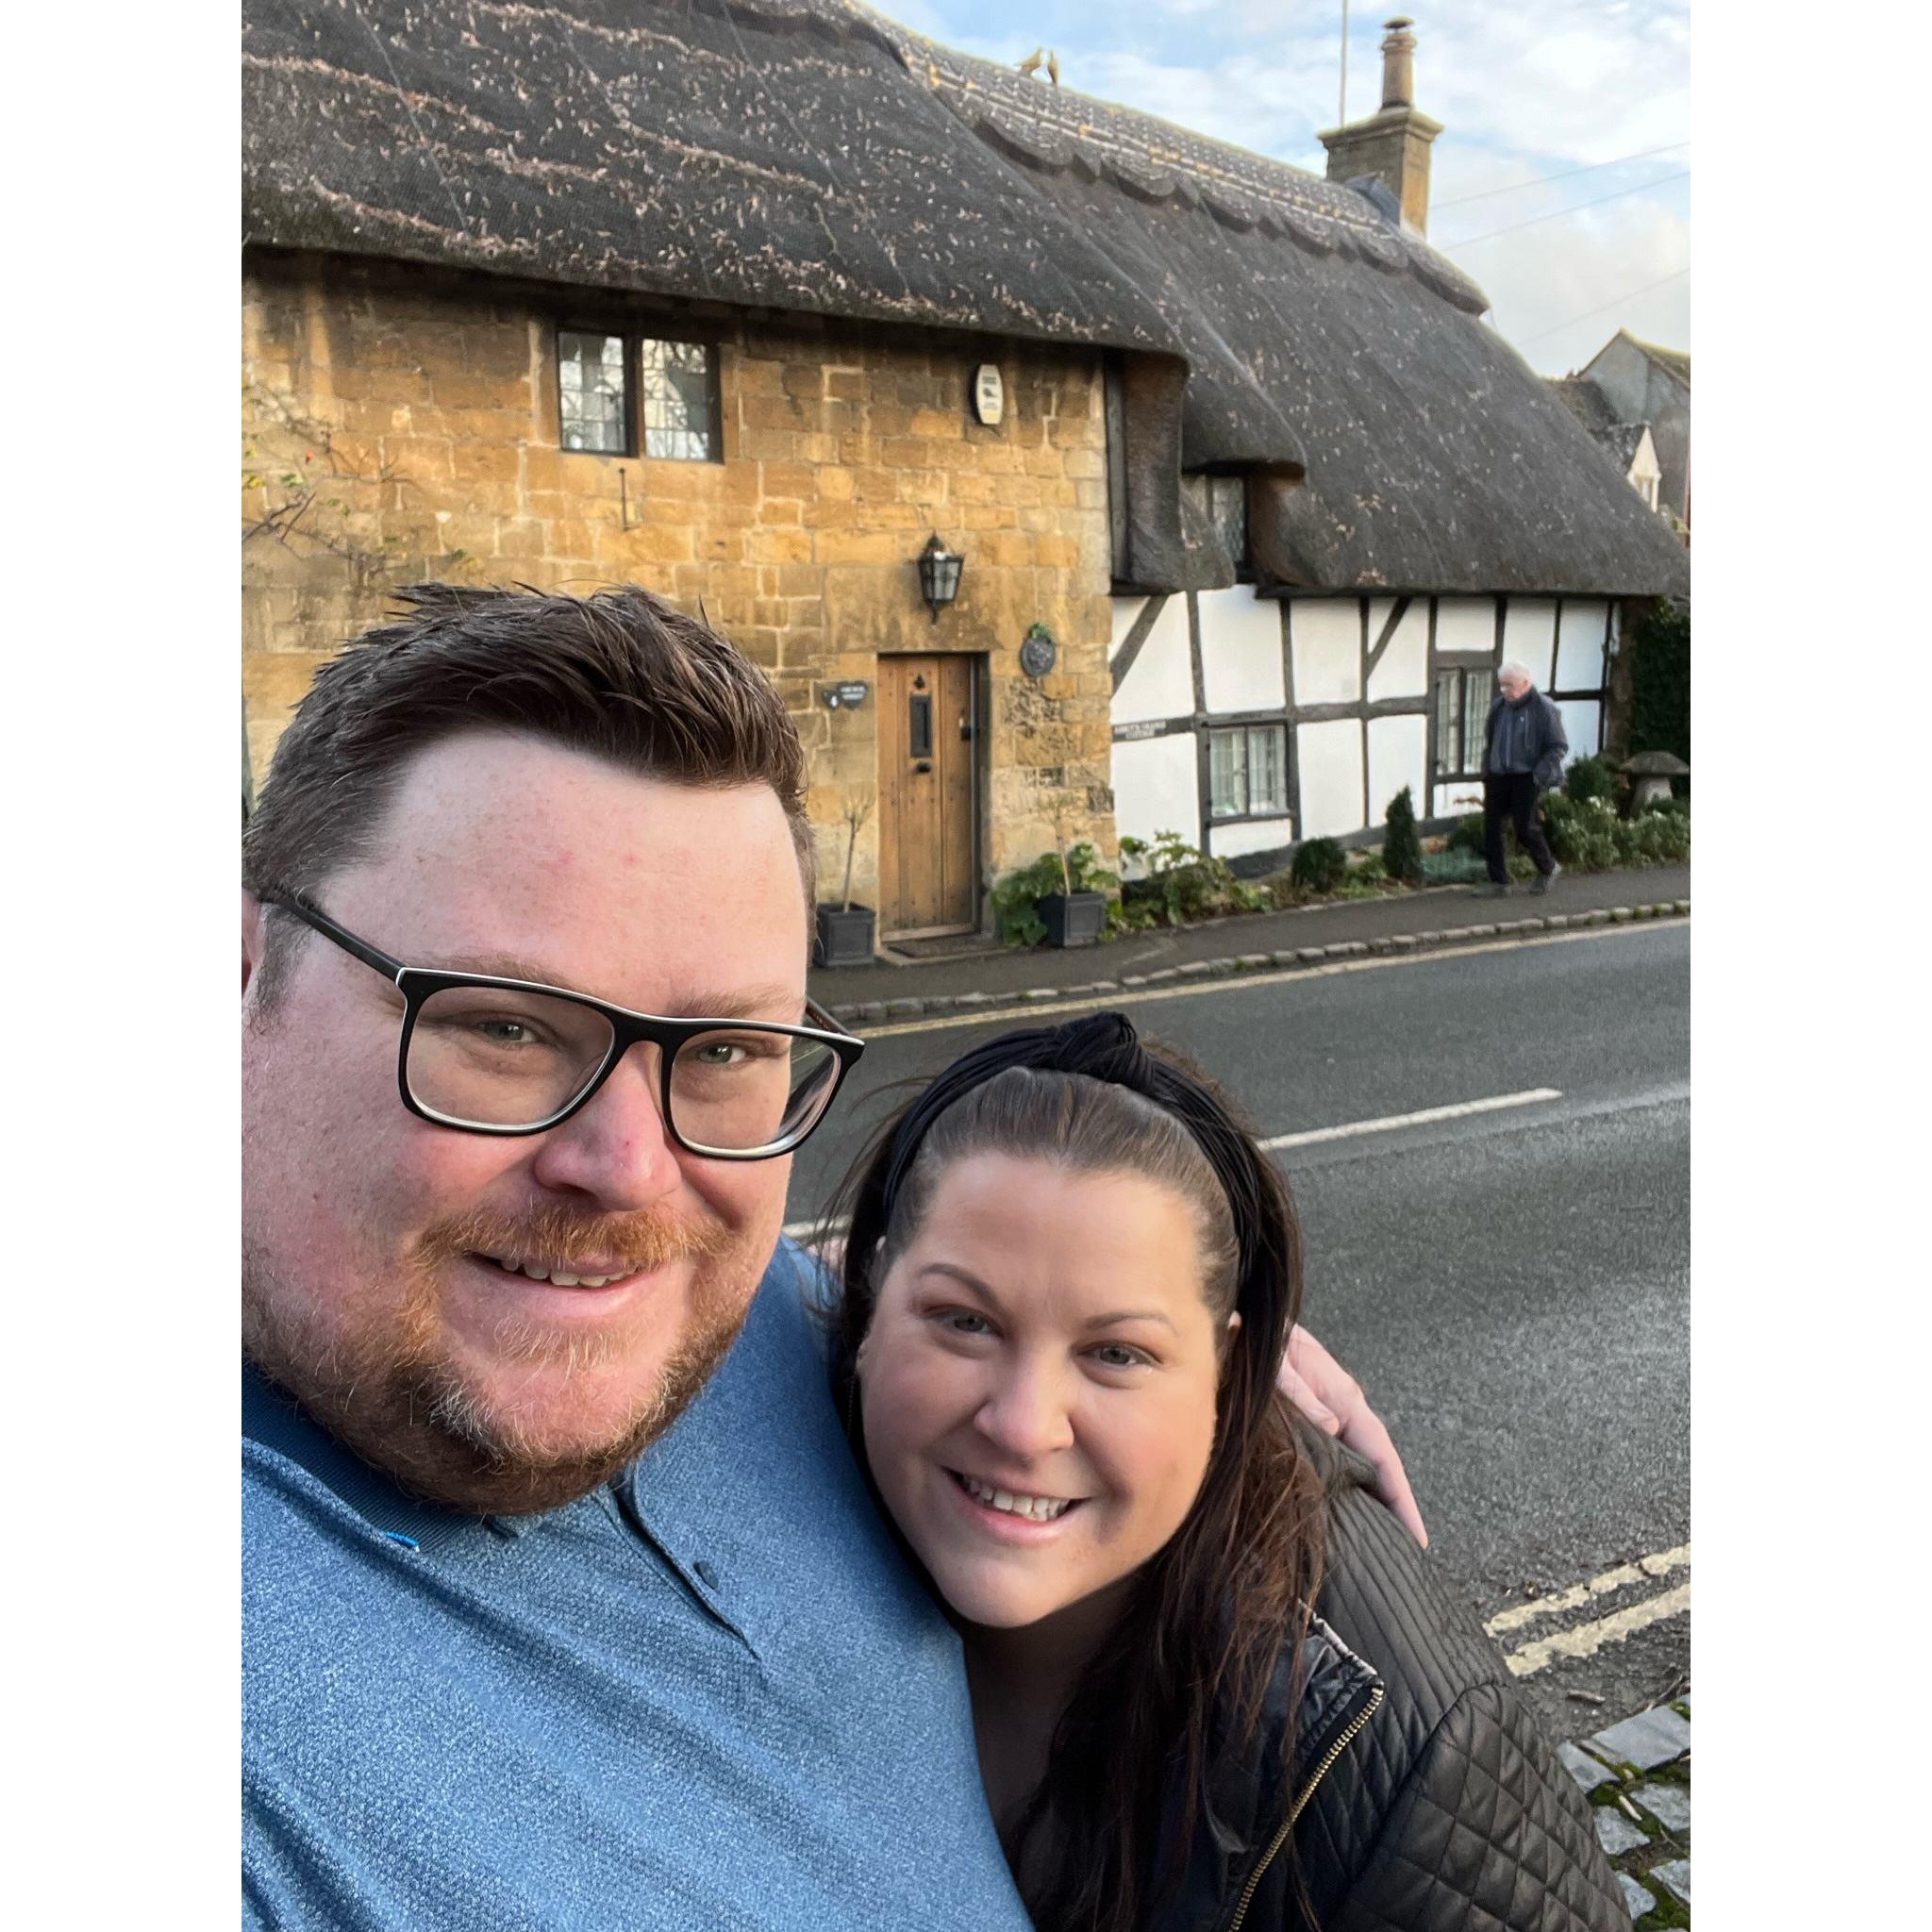 Thatched cottages are our happy place